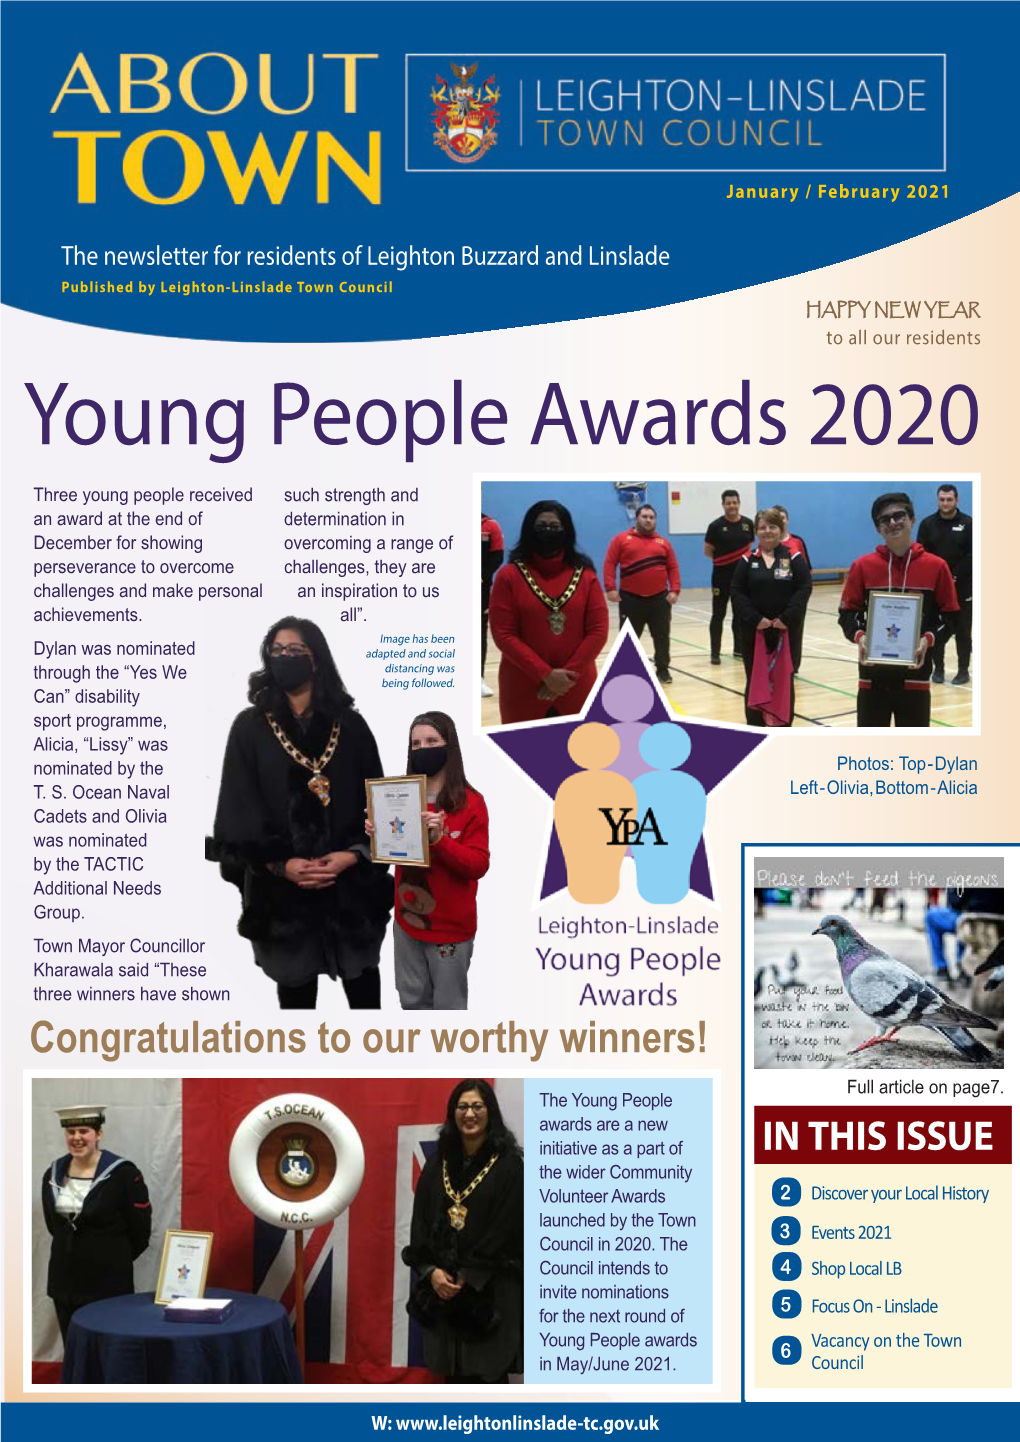 The Newsletter for Residents of Leighton Buzzard and Linslade